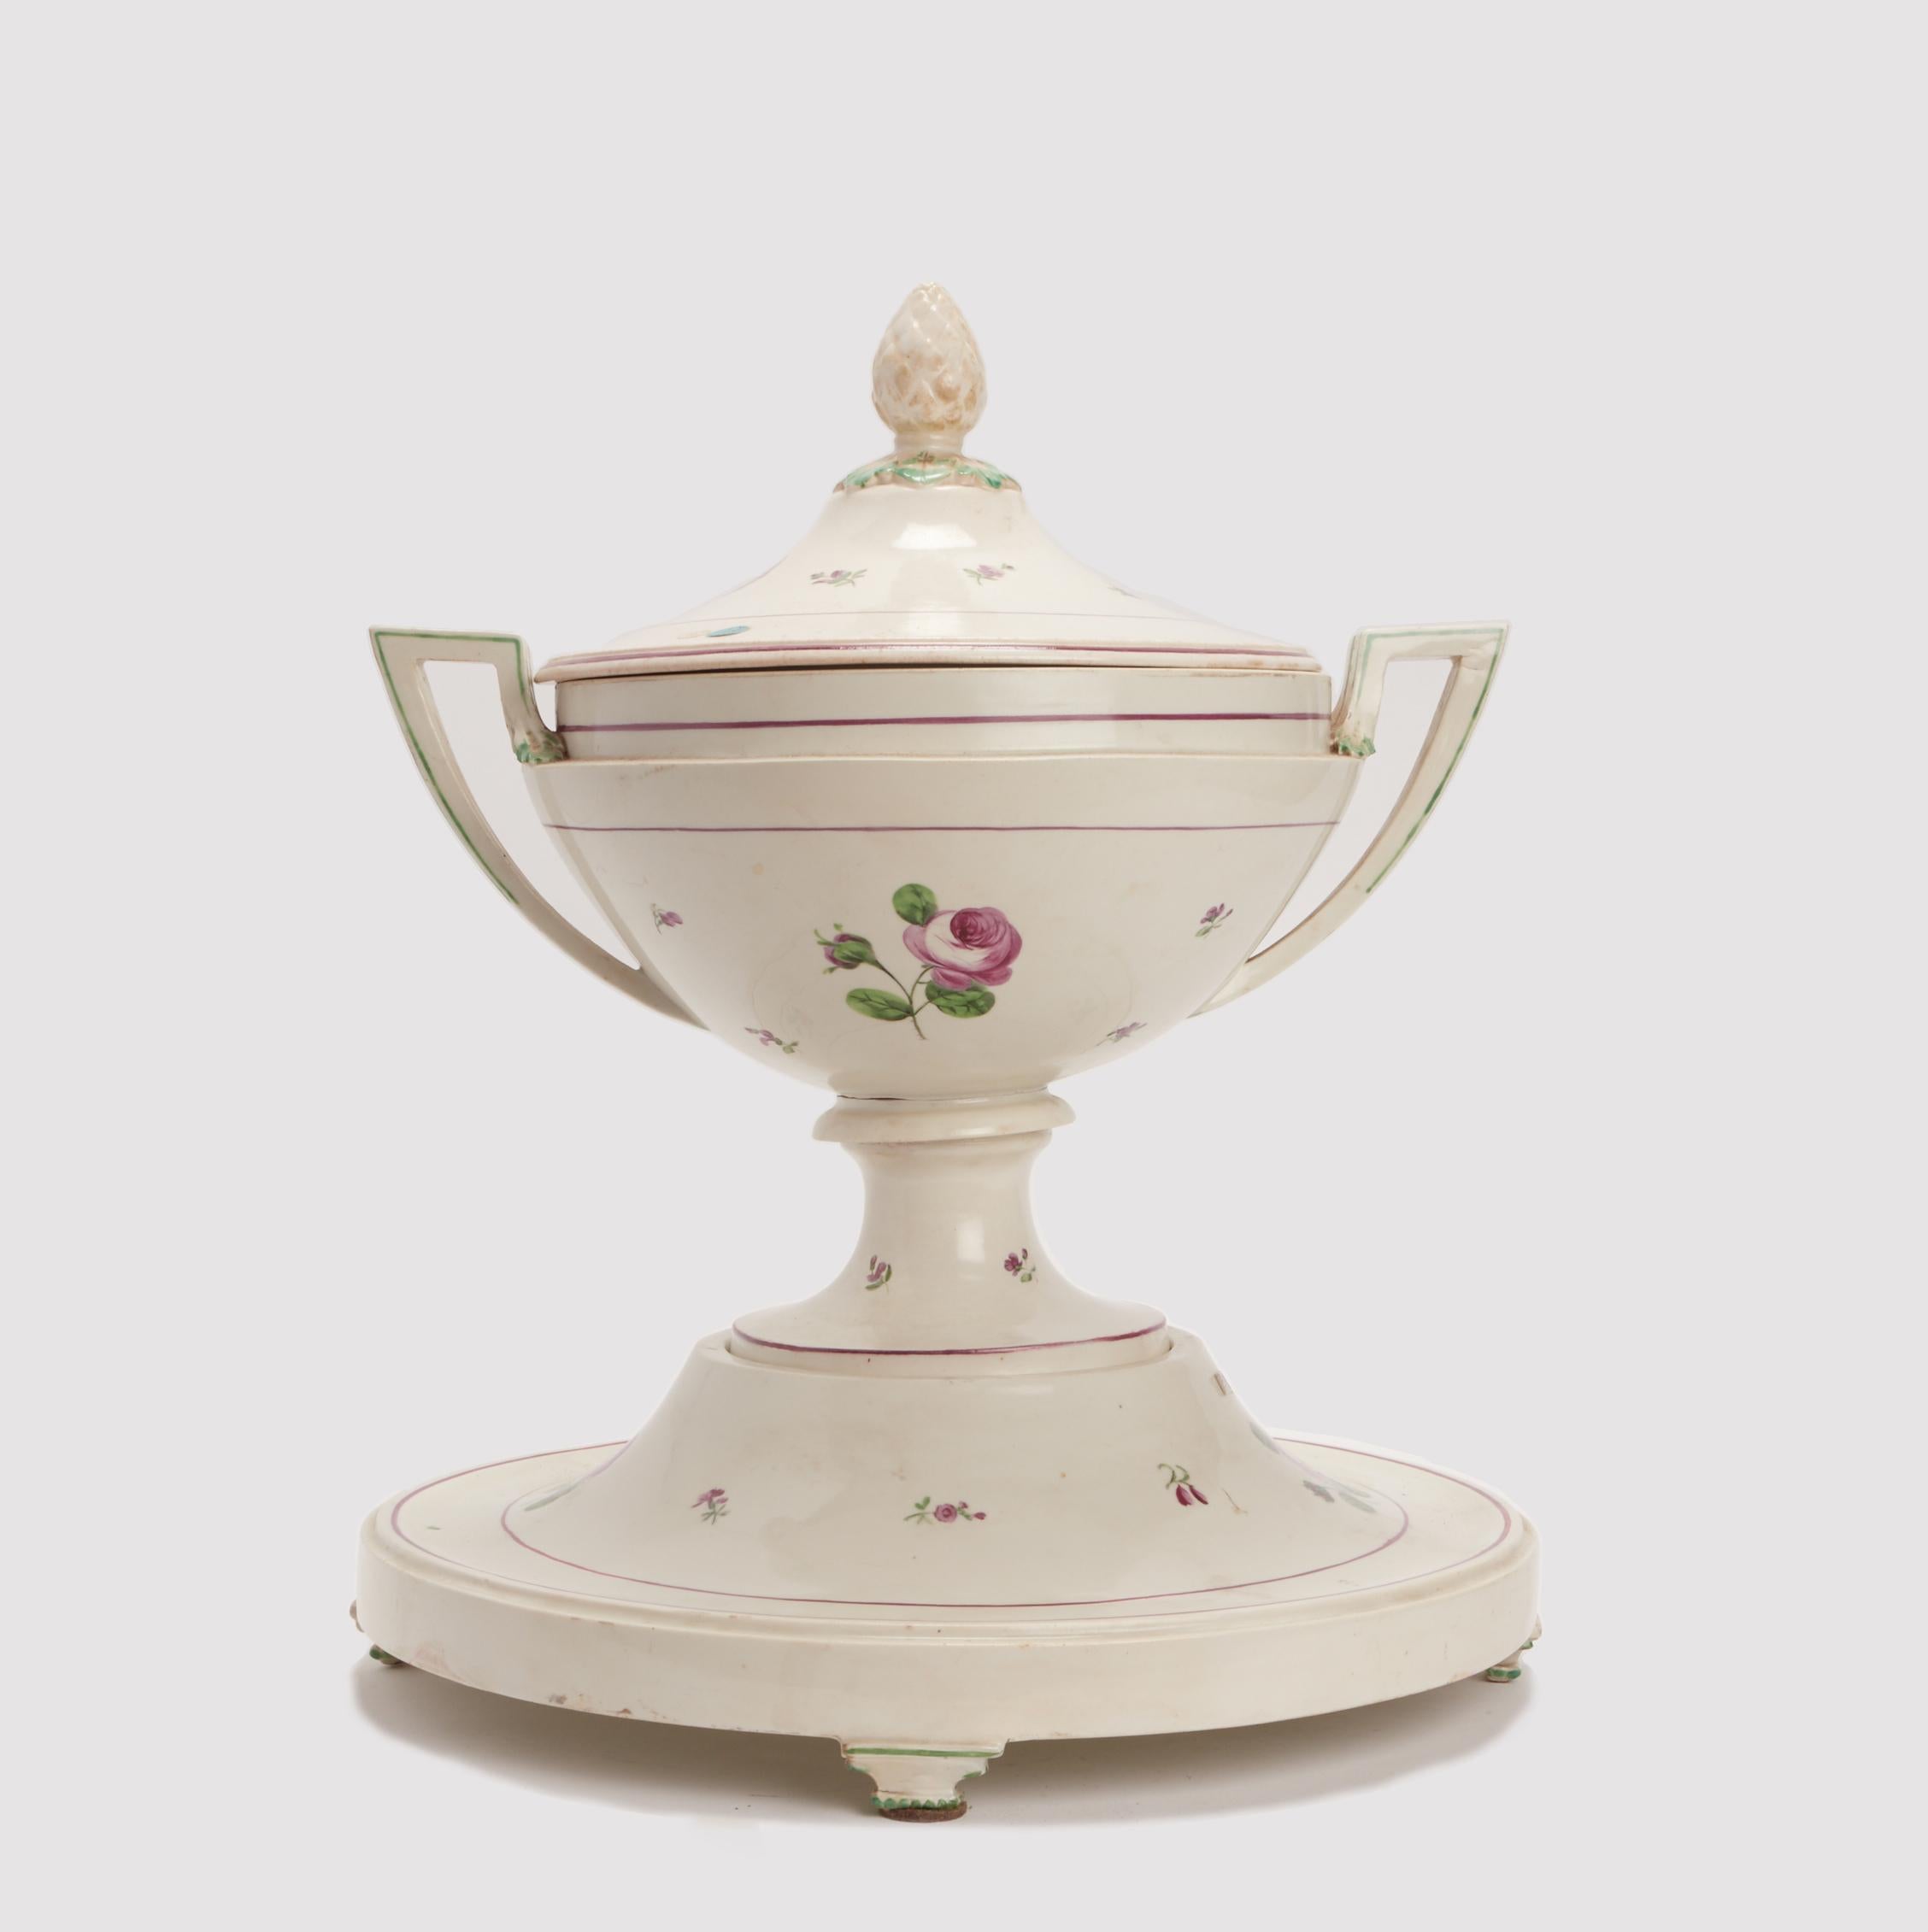 Pair of soup terrine with bases and angled handles, old Vienna porcelain manufactory, decorated with roses motives over white field. Underlined with light purple and green lines. Geometrical shaped feet, top of the cover decorated with leaves and a